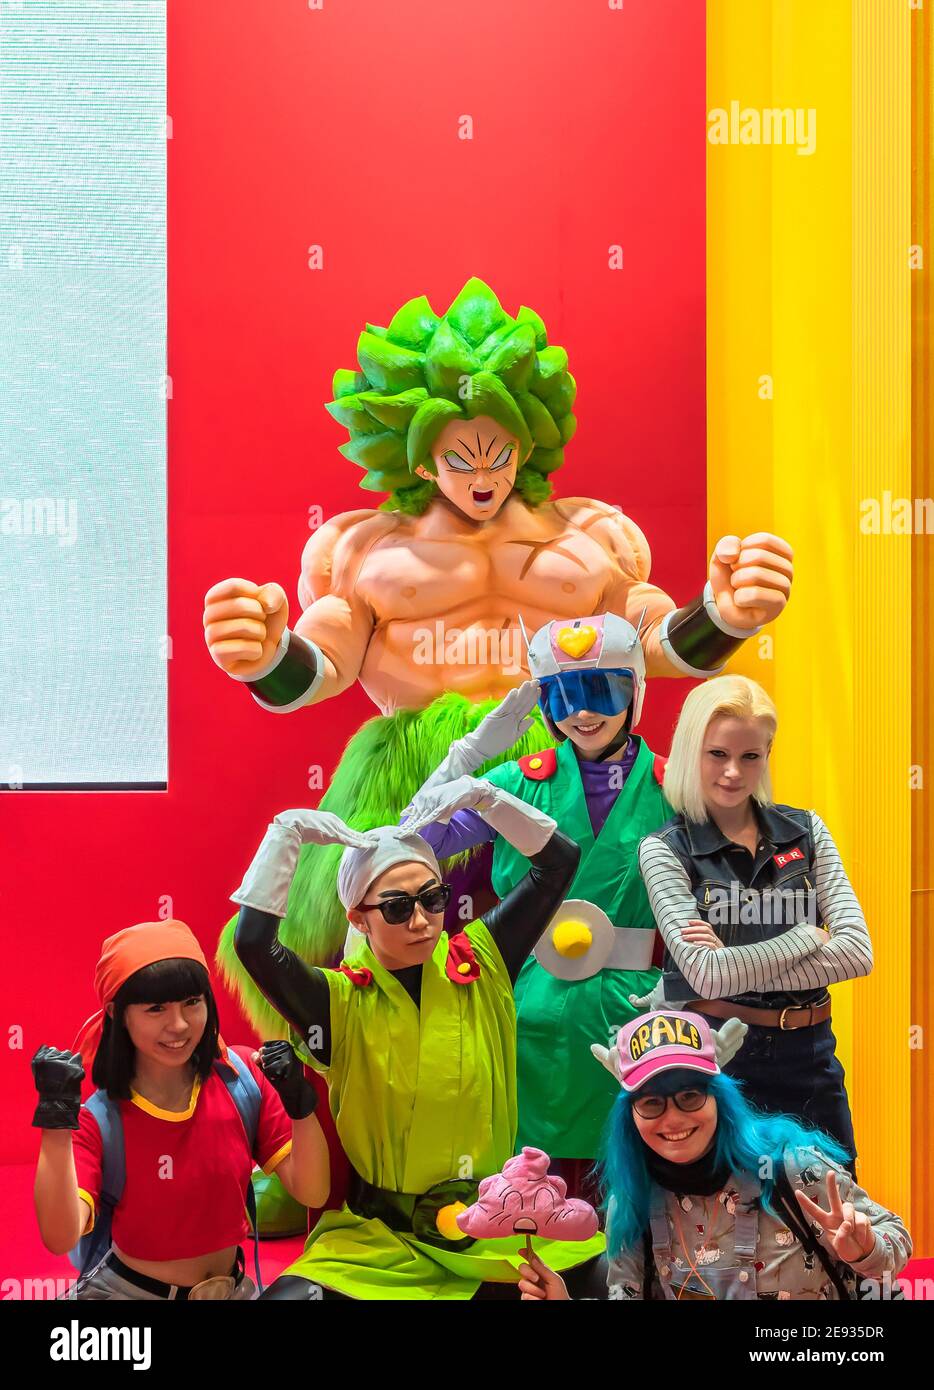 chiba, japan - december 22 2018: Group of young cosplayers wearing costumes and wigs of the characters of the Japanese manga and anime series of Drago Stock Photo